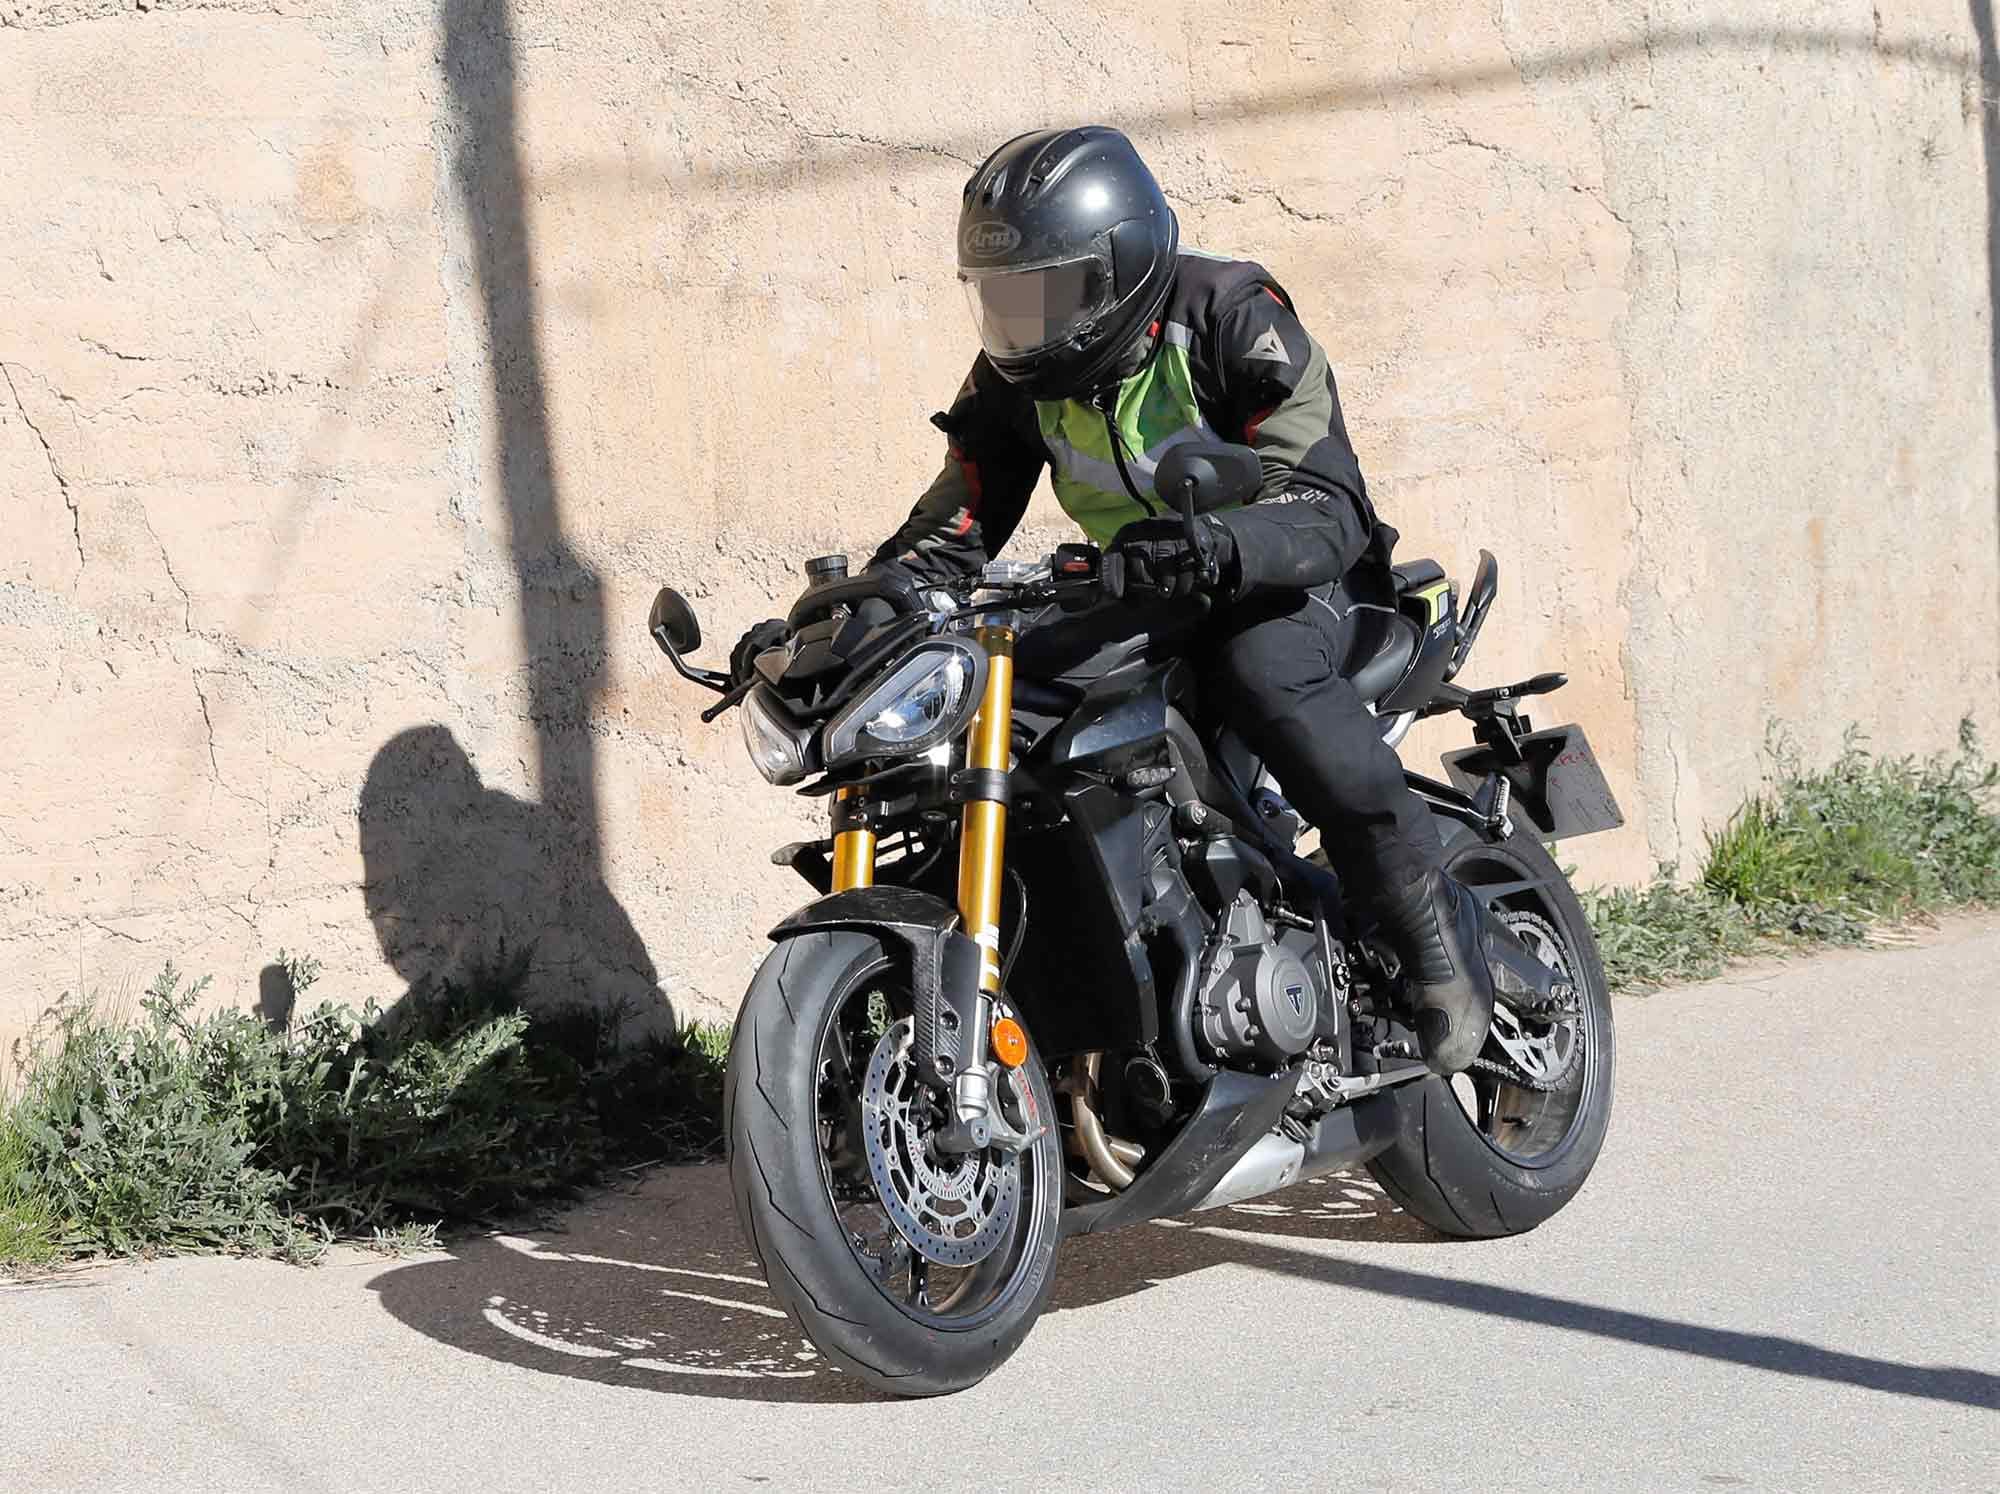 These spy shots suggest a renewed Street Triple RS may appear in Triumph’s 2023 lineup.